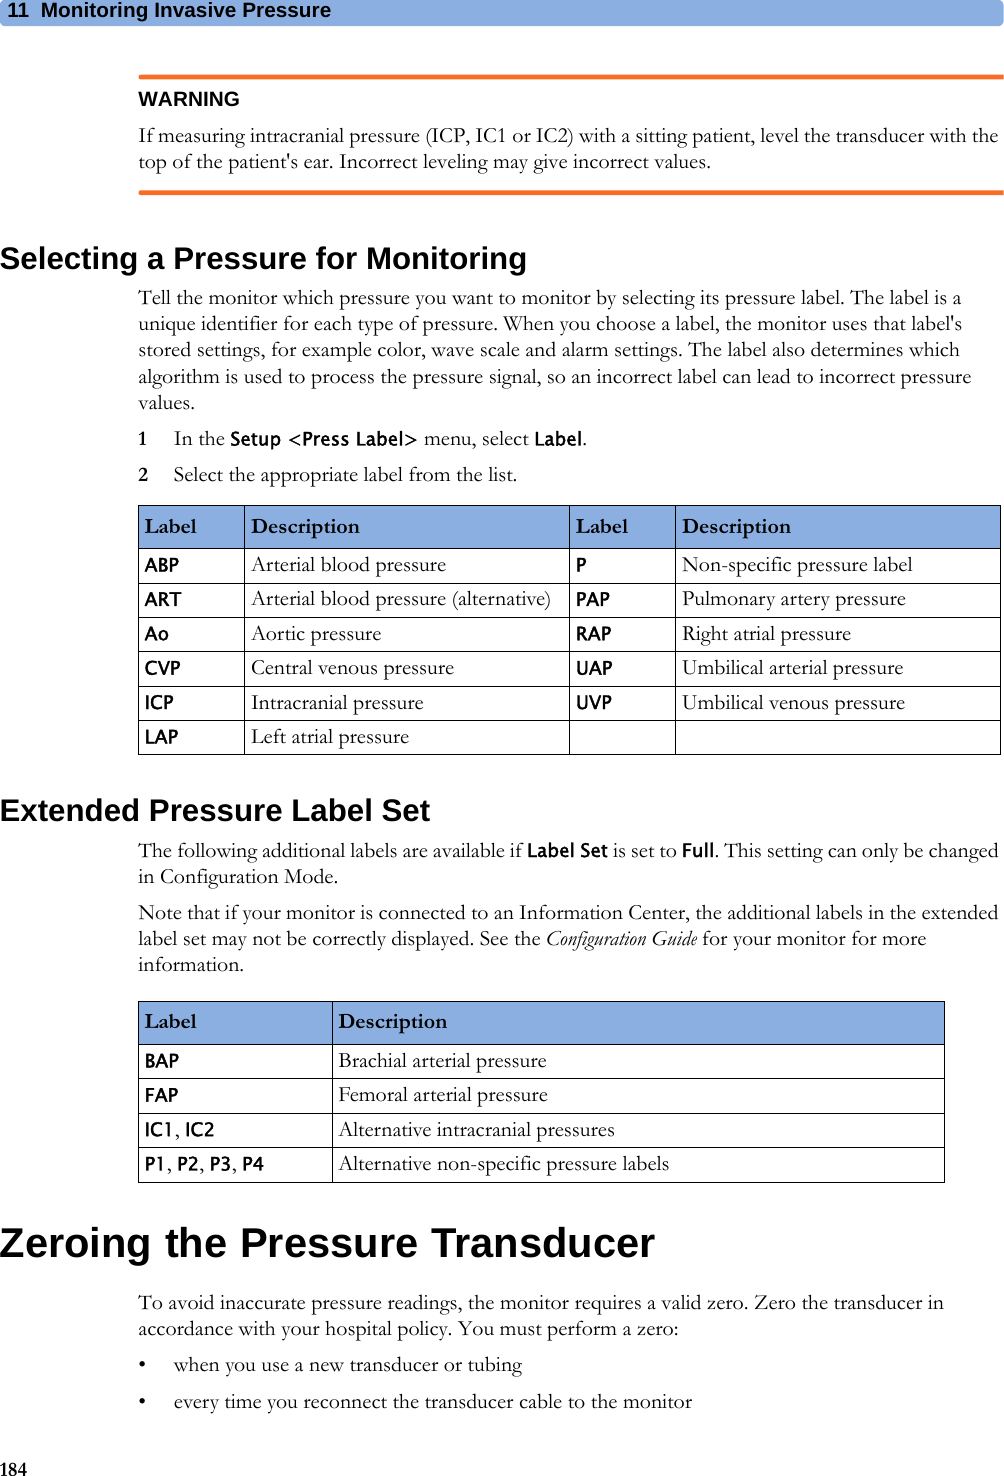 11 Monitoring Invasive Pressure184WARNINGIf measuring intracranial pressure (ICP, IC1 or IC2) with a sitting patient, level the transducer with the top of the patient&apos;s ear. Incorrect leveling may give incorrect values.Selecting a Pressure for MonitoringTell the monitor which pressure you want to monitor by selecting its pressure label. The label is a unique identifier for each type of pressure. When you choose a label, the monitor uses that label&apos;s stored settings, for example color, wave scale and alarm settings. The label also determines which algorithm is used to process the pressure signal, so an incorrect label can lead to incorrect pressure values.1In the Setup &lt;Press Label&gt; menu, select Label.2Select the appropriate label from the list.Extended Pressure Label SetThe following additional labels are available if Label Set is set to Full. This setting can only be changed in Configuration Mode.Note that if your monitor is connected to an Information Center, the additional labels in the extended label set may not be correctly displayed. See the Configuration Guide for your monitor for more information.Zeroing the Pressure TransducerTo avoid inaccurate pressure readings, the monitor requires a valid zero. Zero the transducer in accordance with your hospital policy. You must perform a zero:• when you use a new transducer or tubing• every time you reconnect the transducer cable to the monitorLabel Description Label DescriptionABP Arterial blood pressure PNon-specific pressure labelART Arterial blood pressure (alternative) PAP Pulmonary artery pressureAo Aortic pressure RAP Right atrial pressureCVP Central venous pressure UAP Umbilical arterial pressureICP Intracranial pressure UVP Umbilical venous pressureLAP Left atrial pressureLabel DescriptionBAP Brachial arterial pressureFAP Femoral arterial pressureIC1, IC2 Alternative intracranial pressuresP1, P2, P3, P4 Alternative non-specific pressure labels 